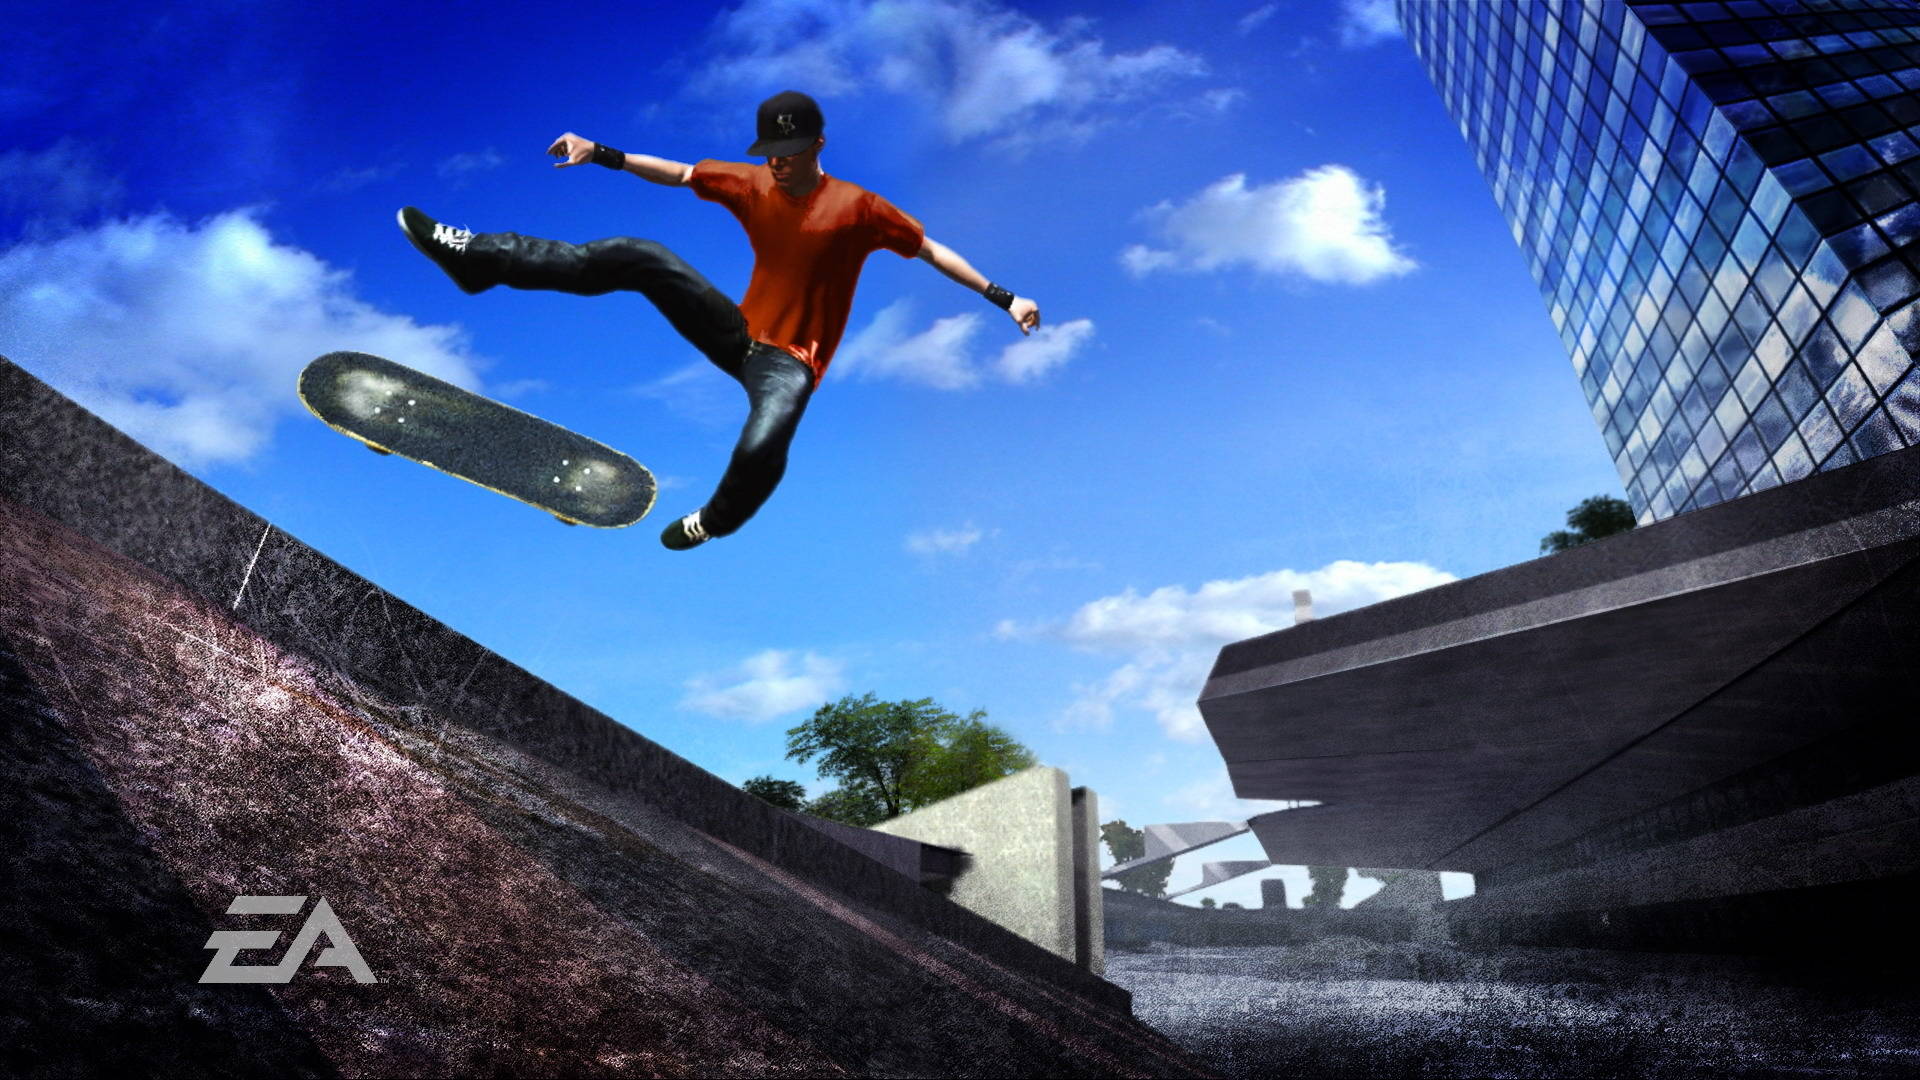 Xbox Game Pass Ultimate Subscribers Can Claim Skate 3 DLC for Free